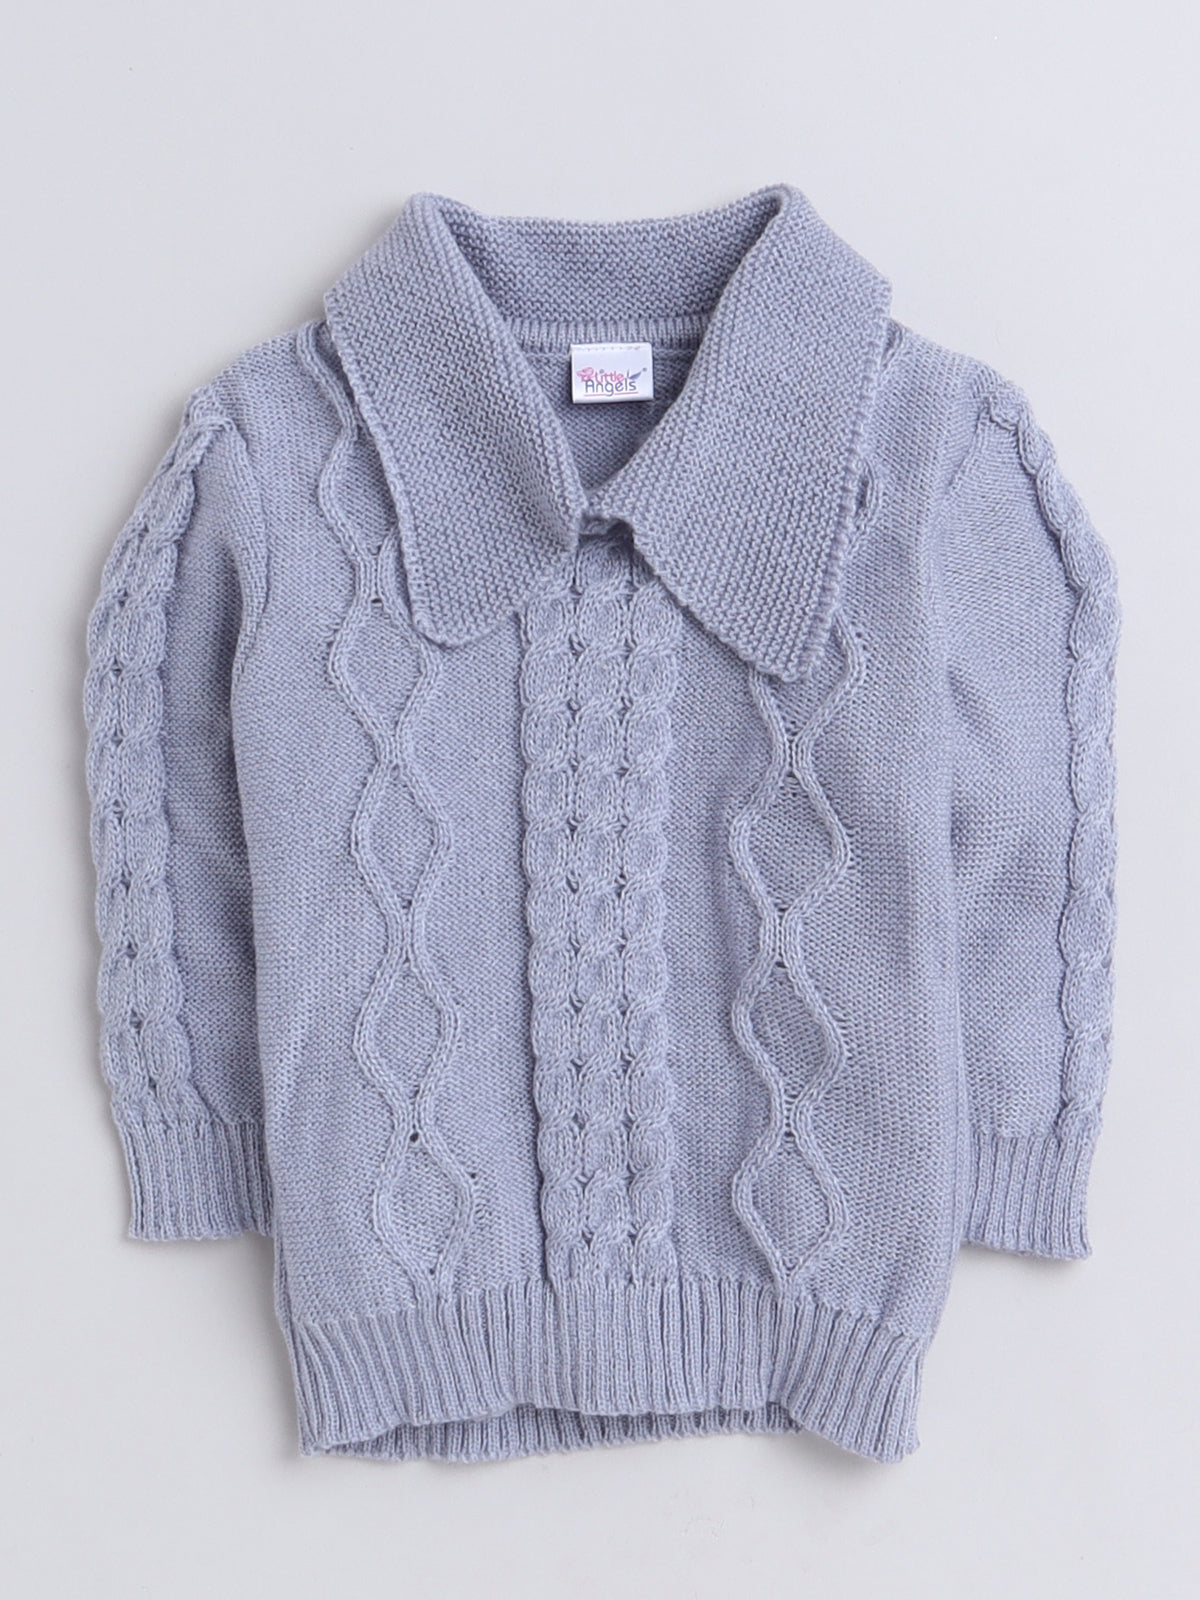 Little Angels Cozy Cable Knit Collared Pullover Set - Grey Sweater with Pant